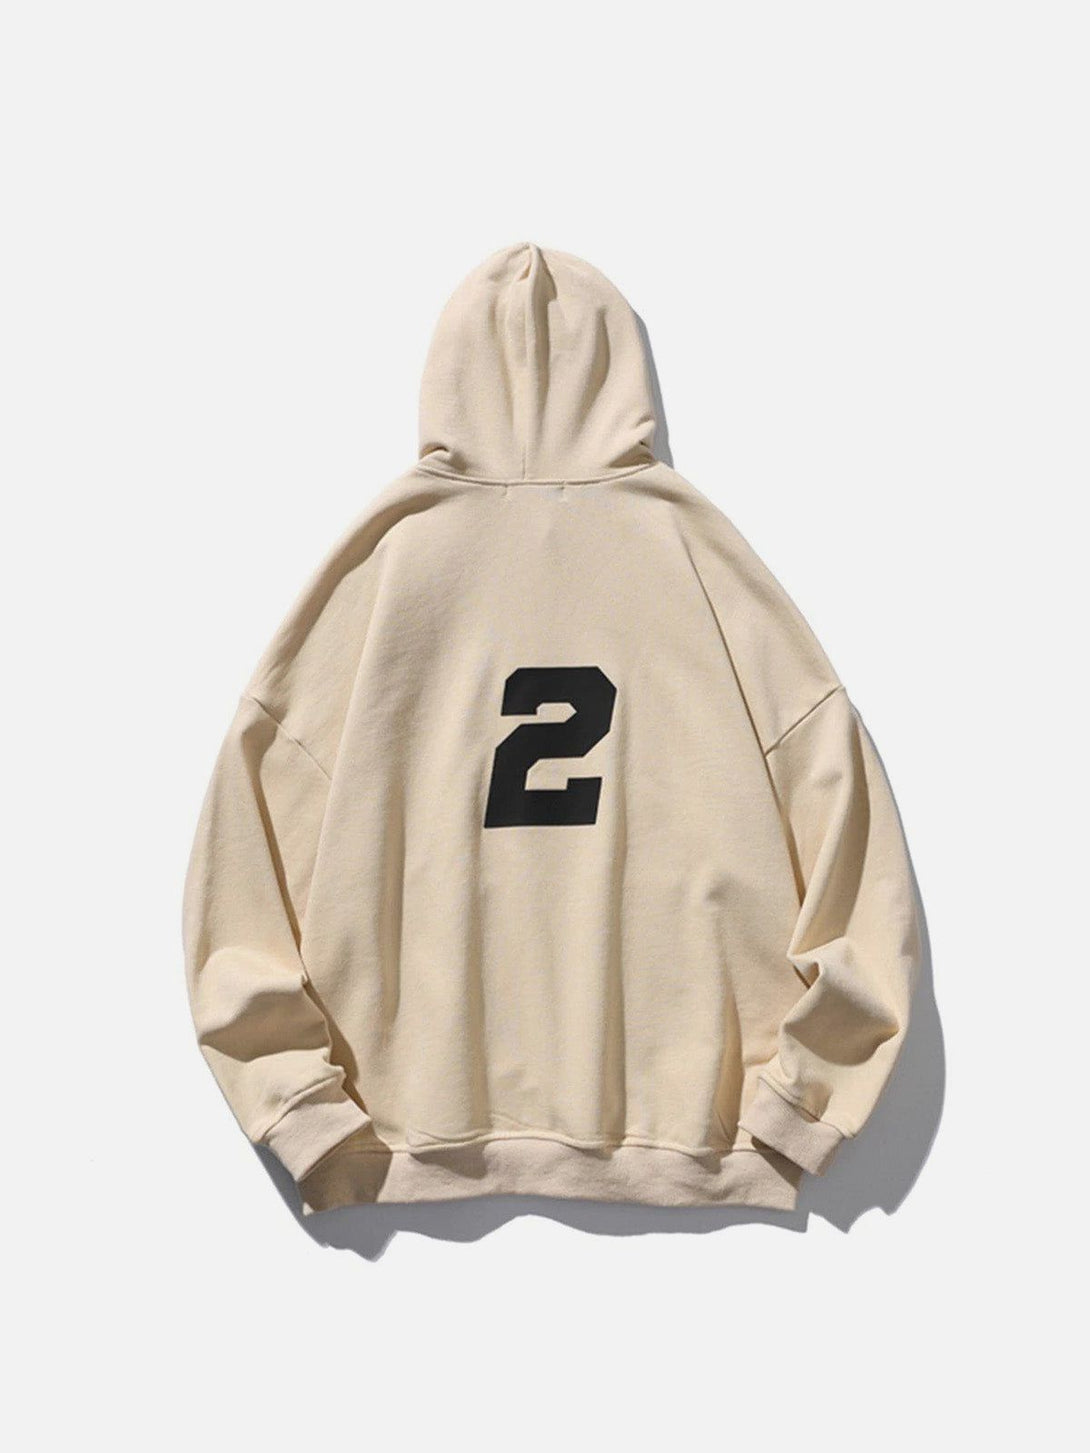 Levefly - Number “2” Print Hoodie - Streetwear Fashion - levefly.com